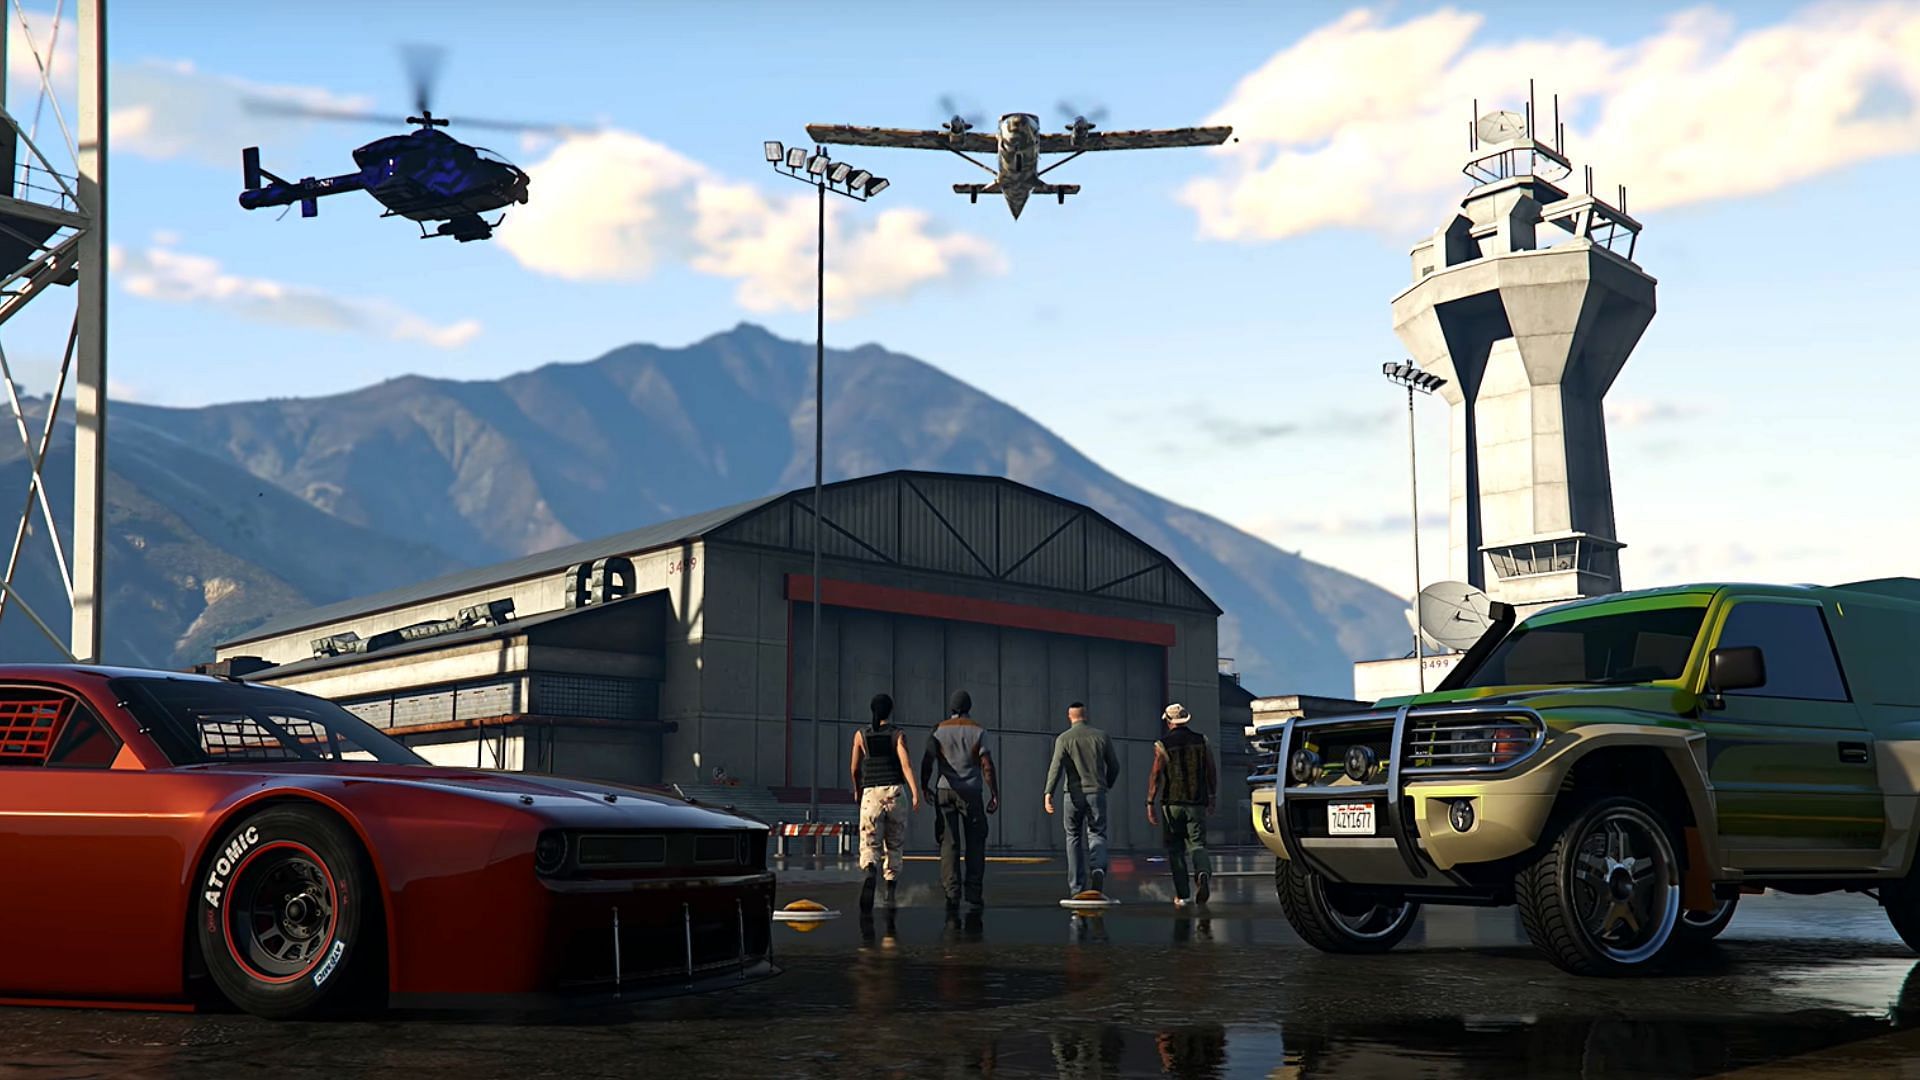 A brief report on the brand new official trailer of GTA Online San Andreas Mercenaries update released by Rockstar Games today (Image via Rockstar Games)